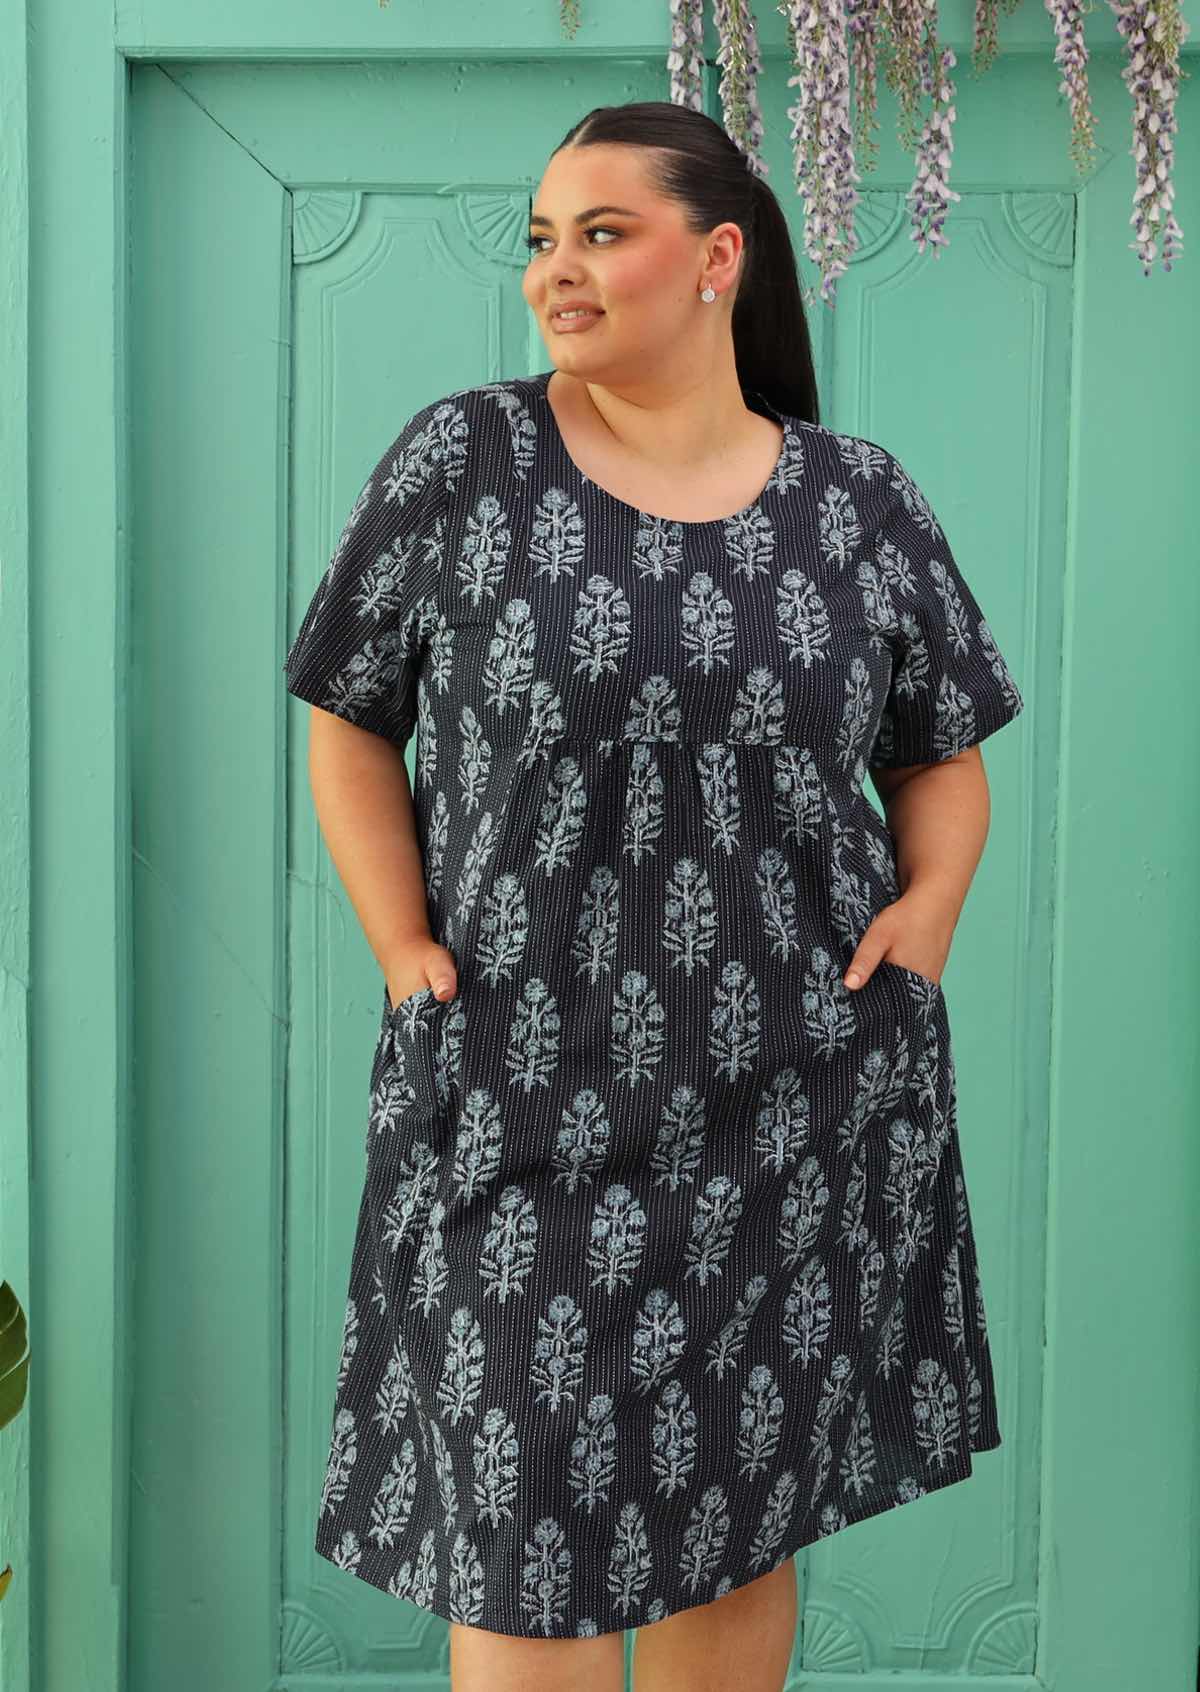 Size 18 model wearing navy blue cotton dress with Indian print and pockets